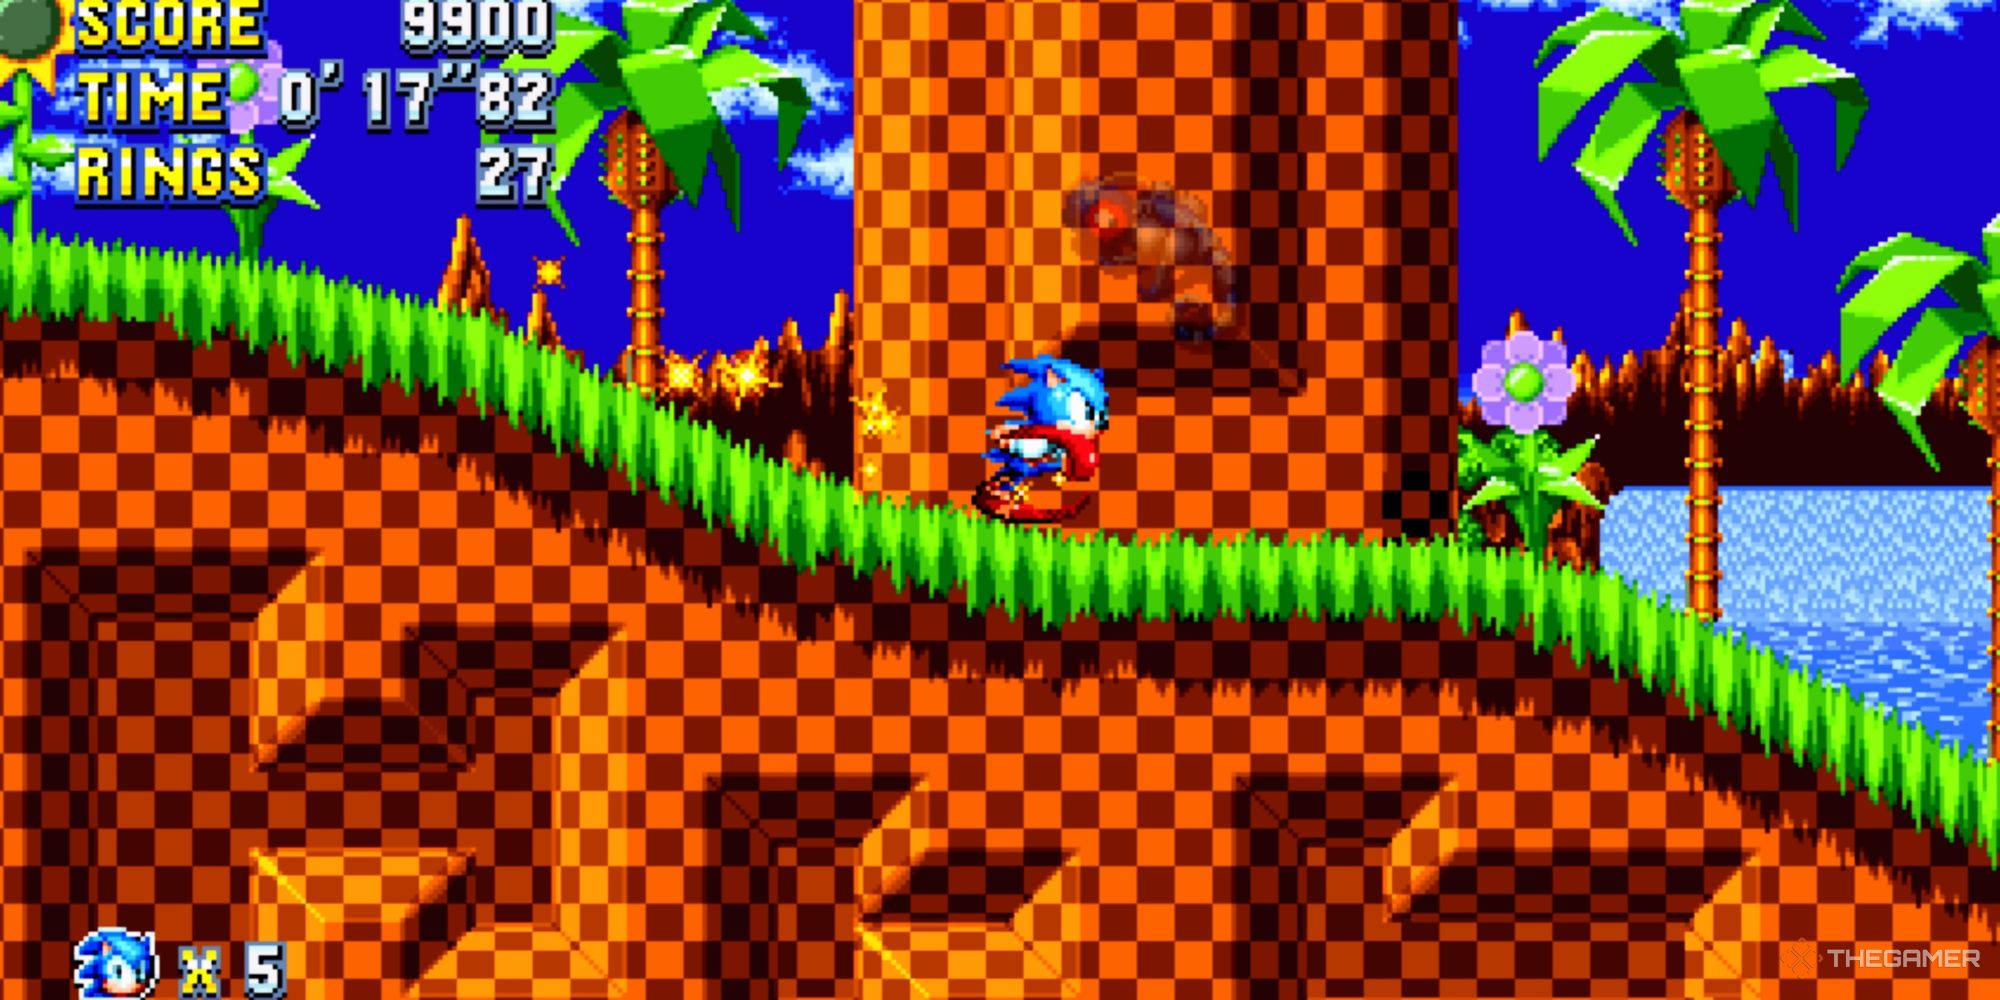 Sonic running along in the first level of Sonic Mania